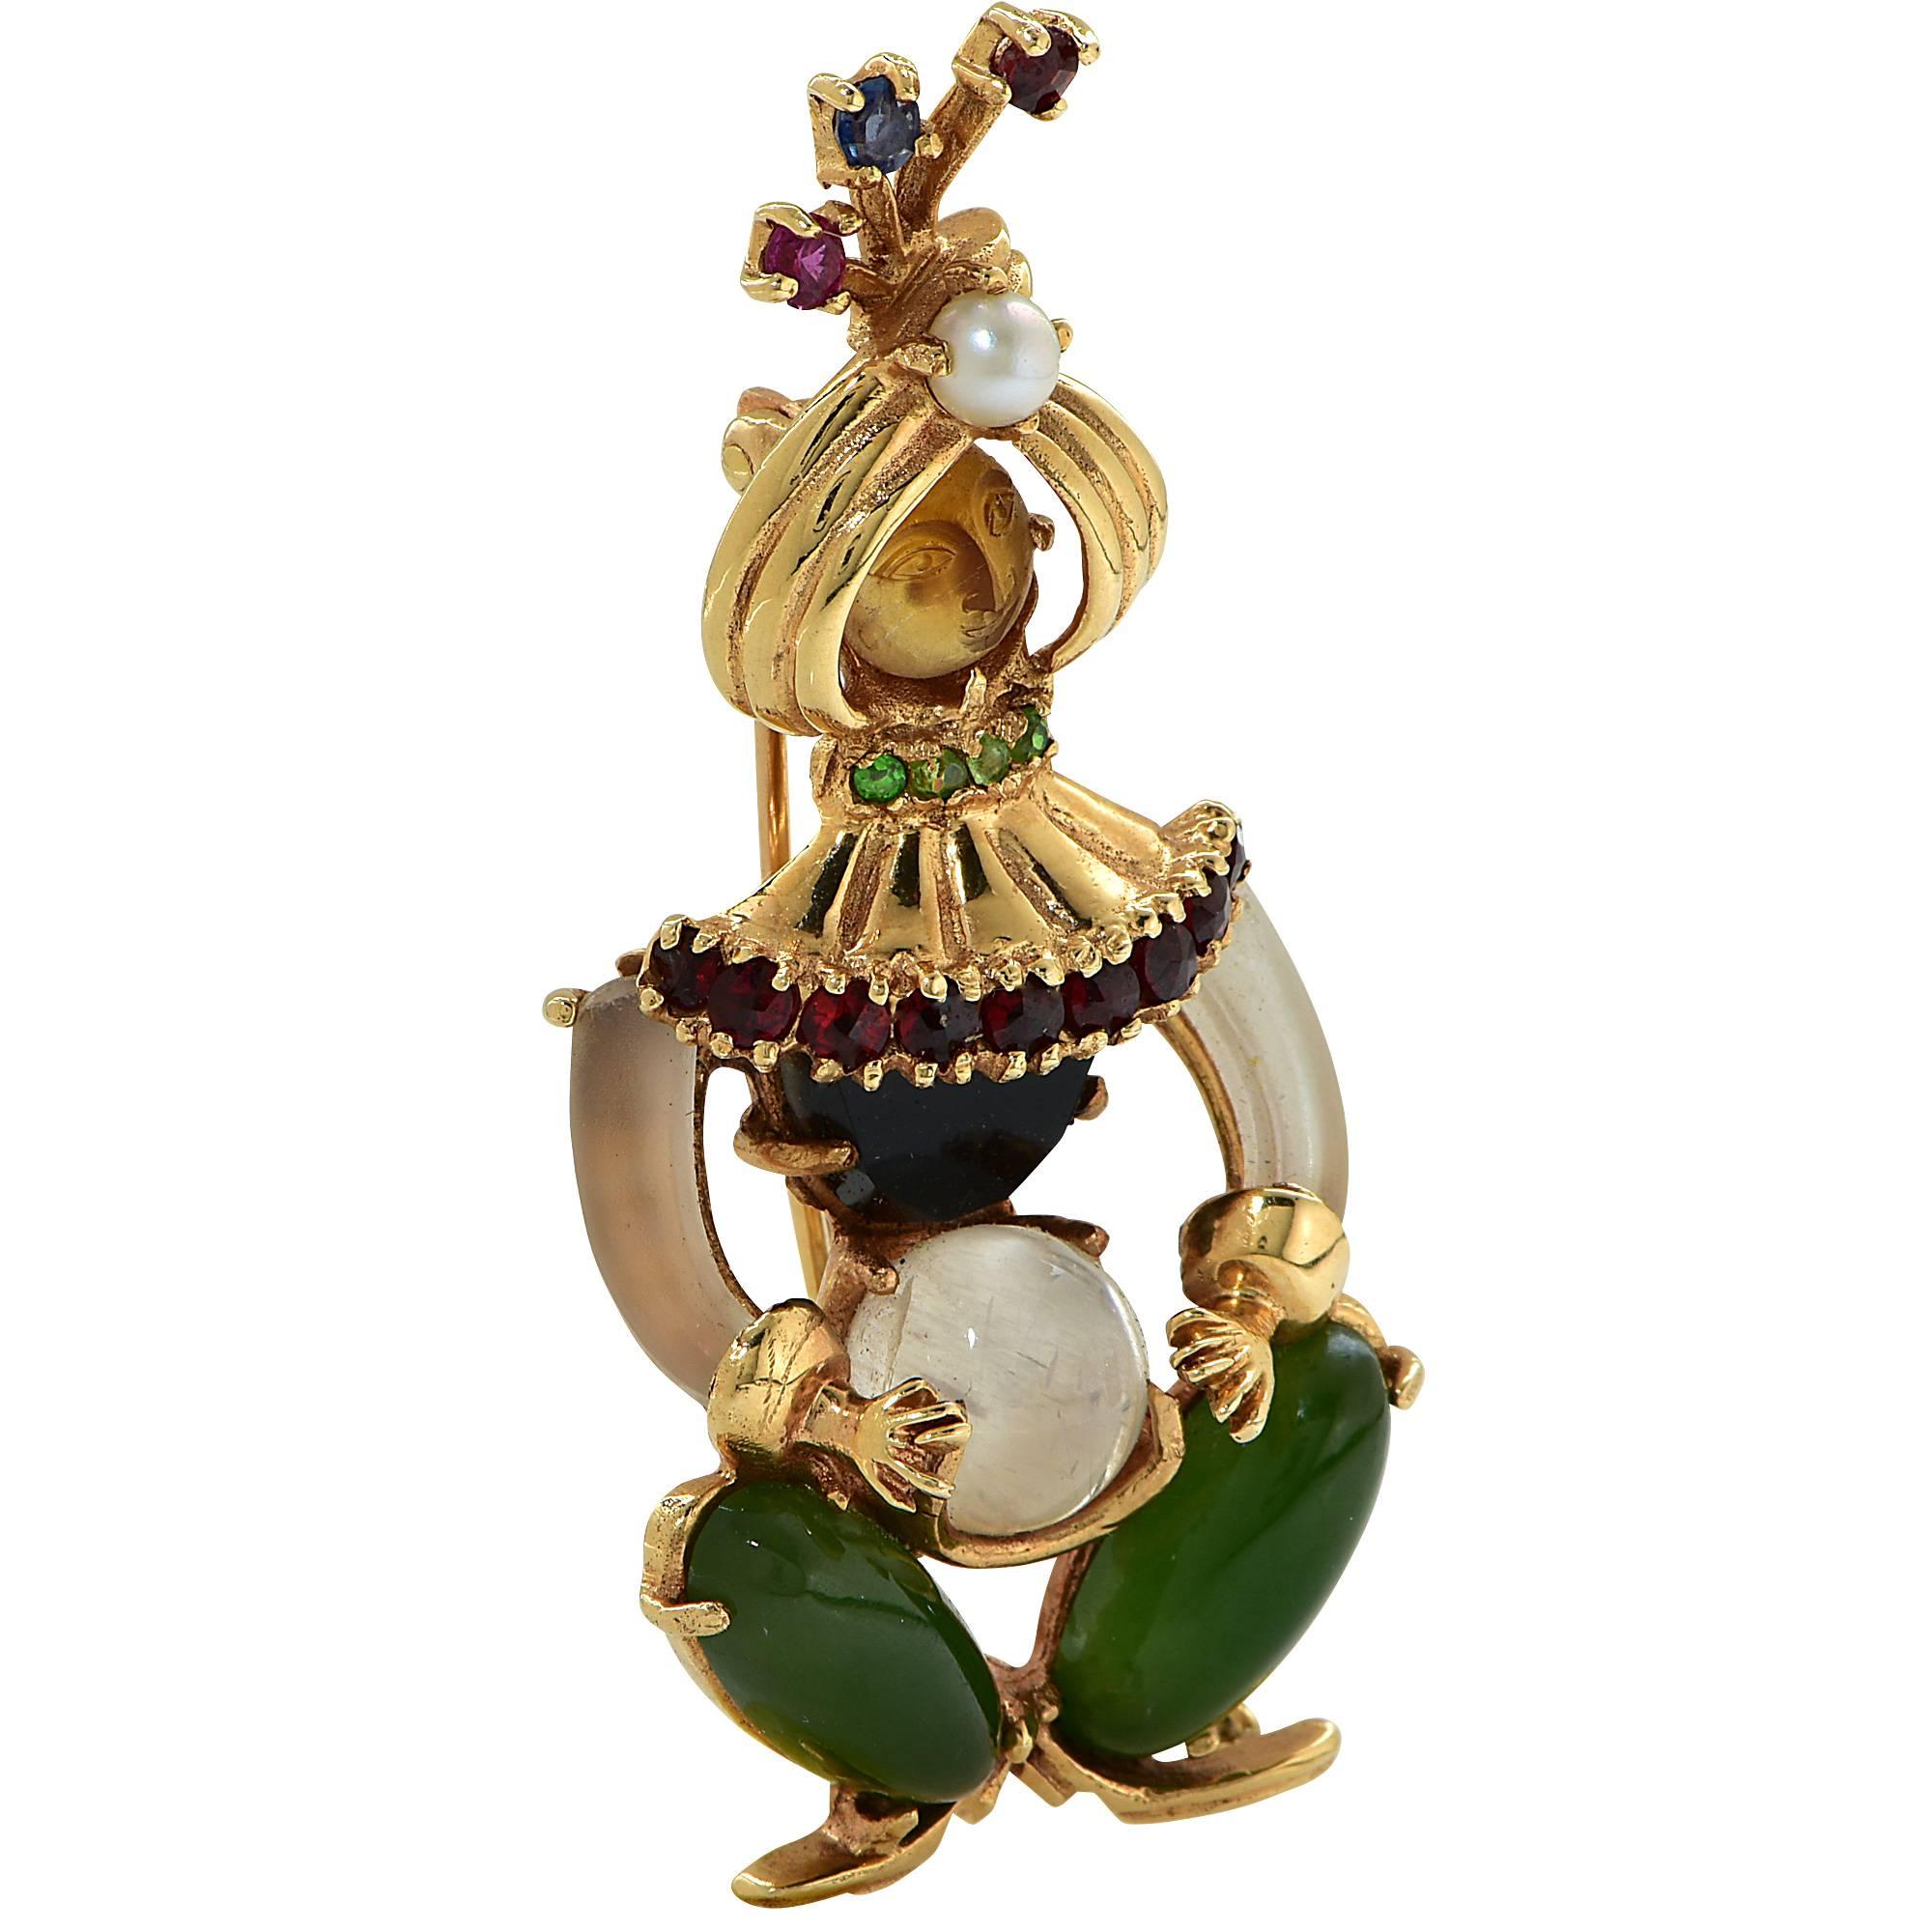 14k yellow gold vintage harlequin brooch featuring rock crystal, garnets and jade.

Measurements: 2 inch length by .8 width inch by .40 inch depth
Metal weight: 13.99 grams

This gemstone brooch is accompanied by a retail appraisal performed by